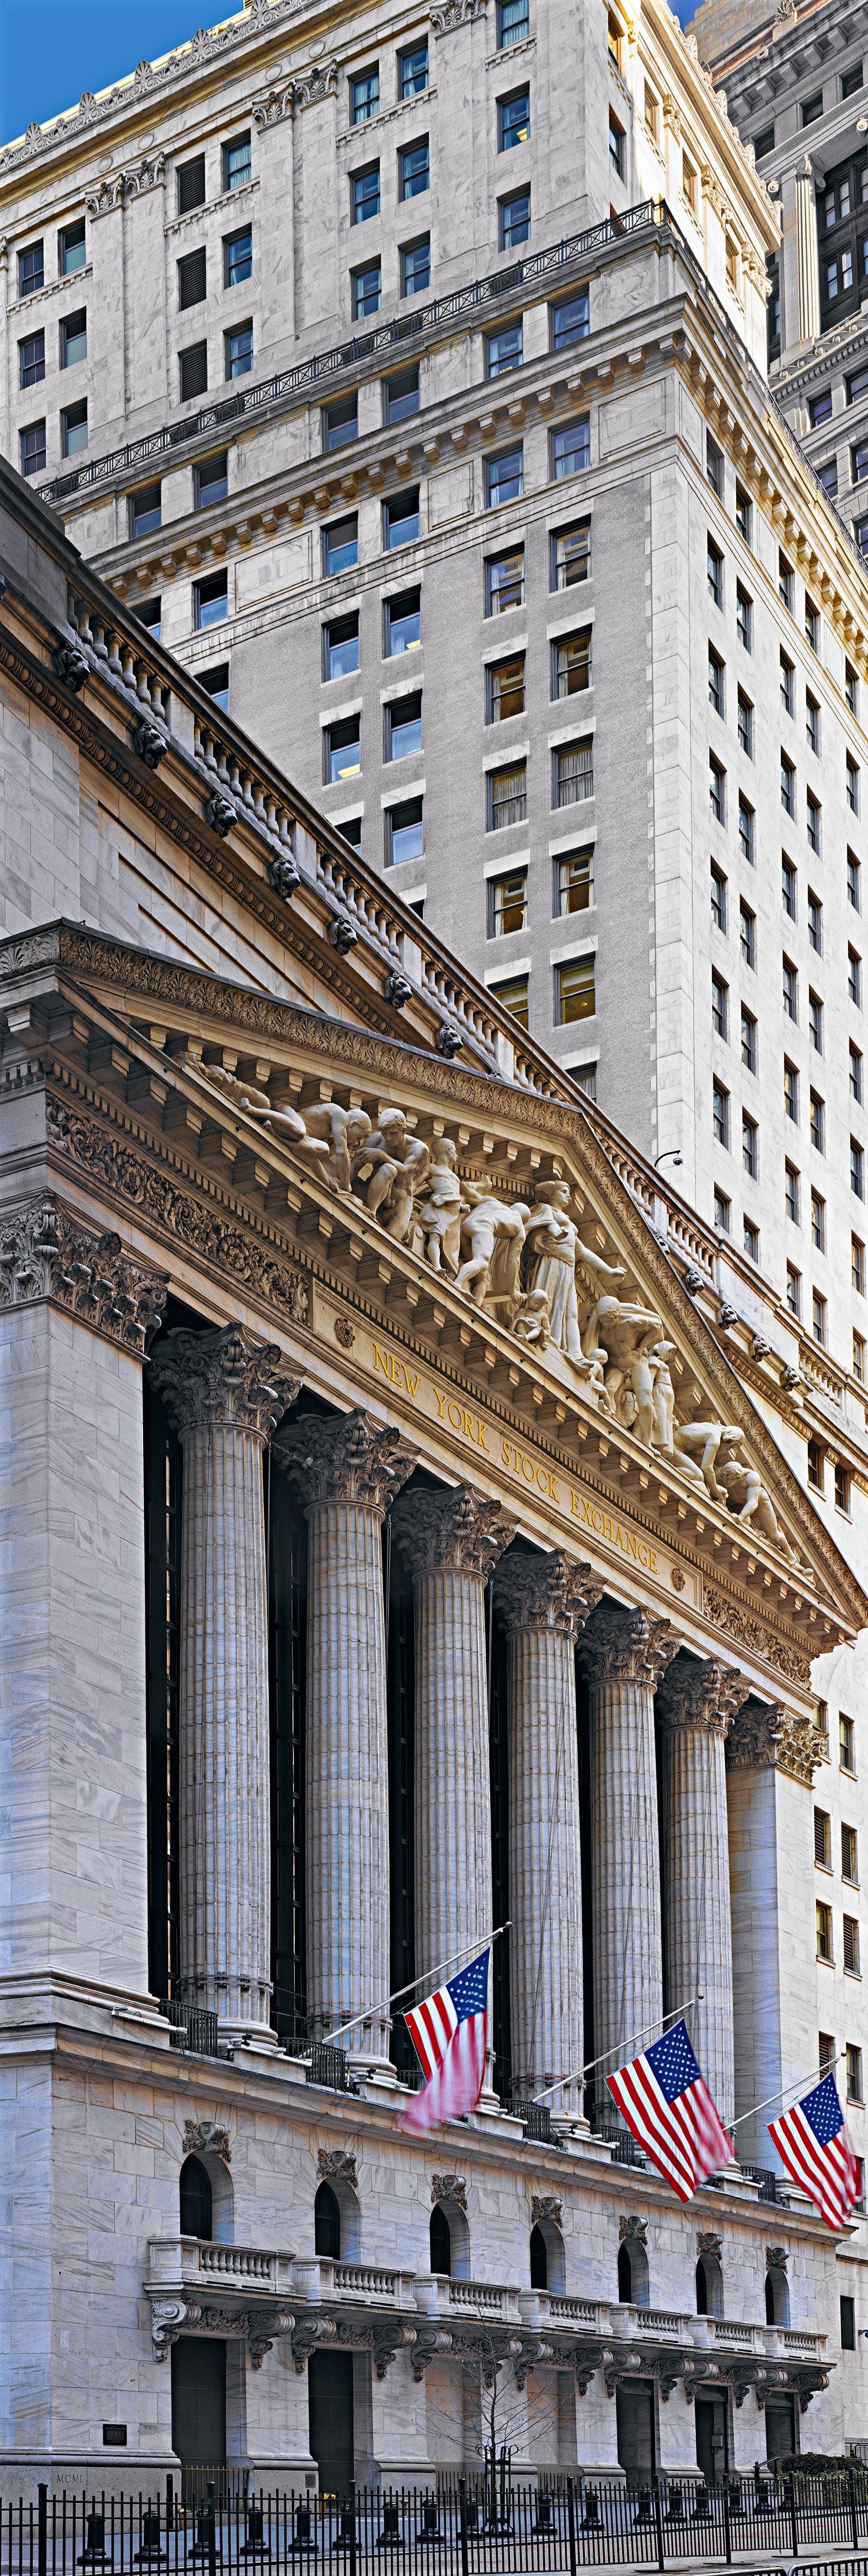 Stone pillars and architectural carvings on the exterior of a building on Wall Street New York